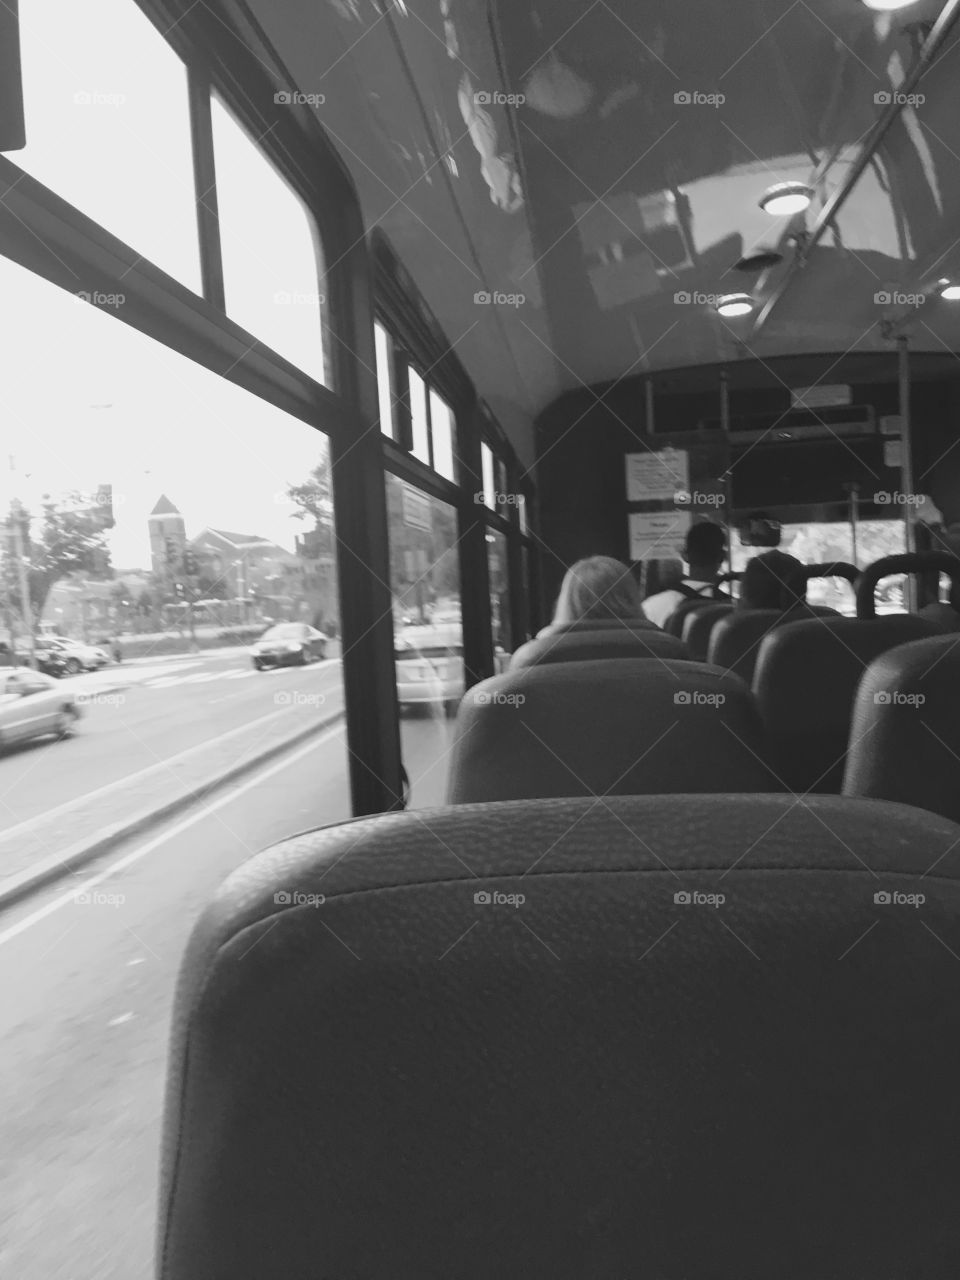 Sitting on the back of the bus as a black person in black and white